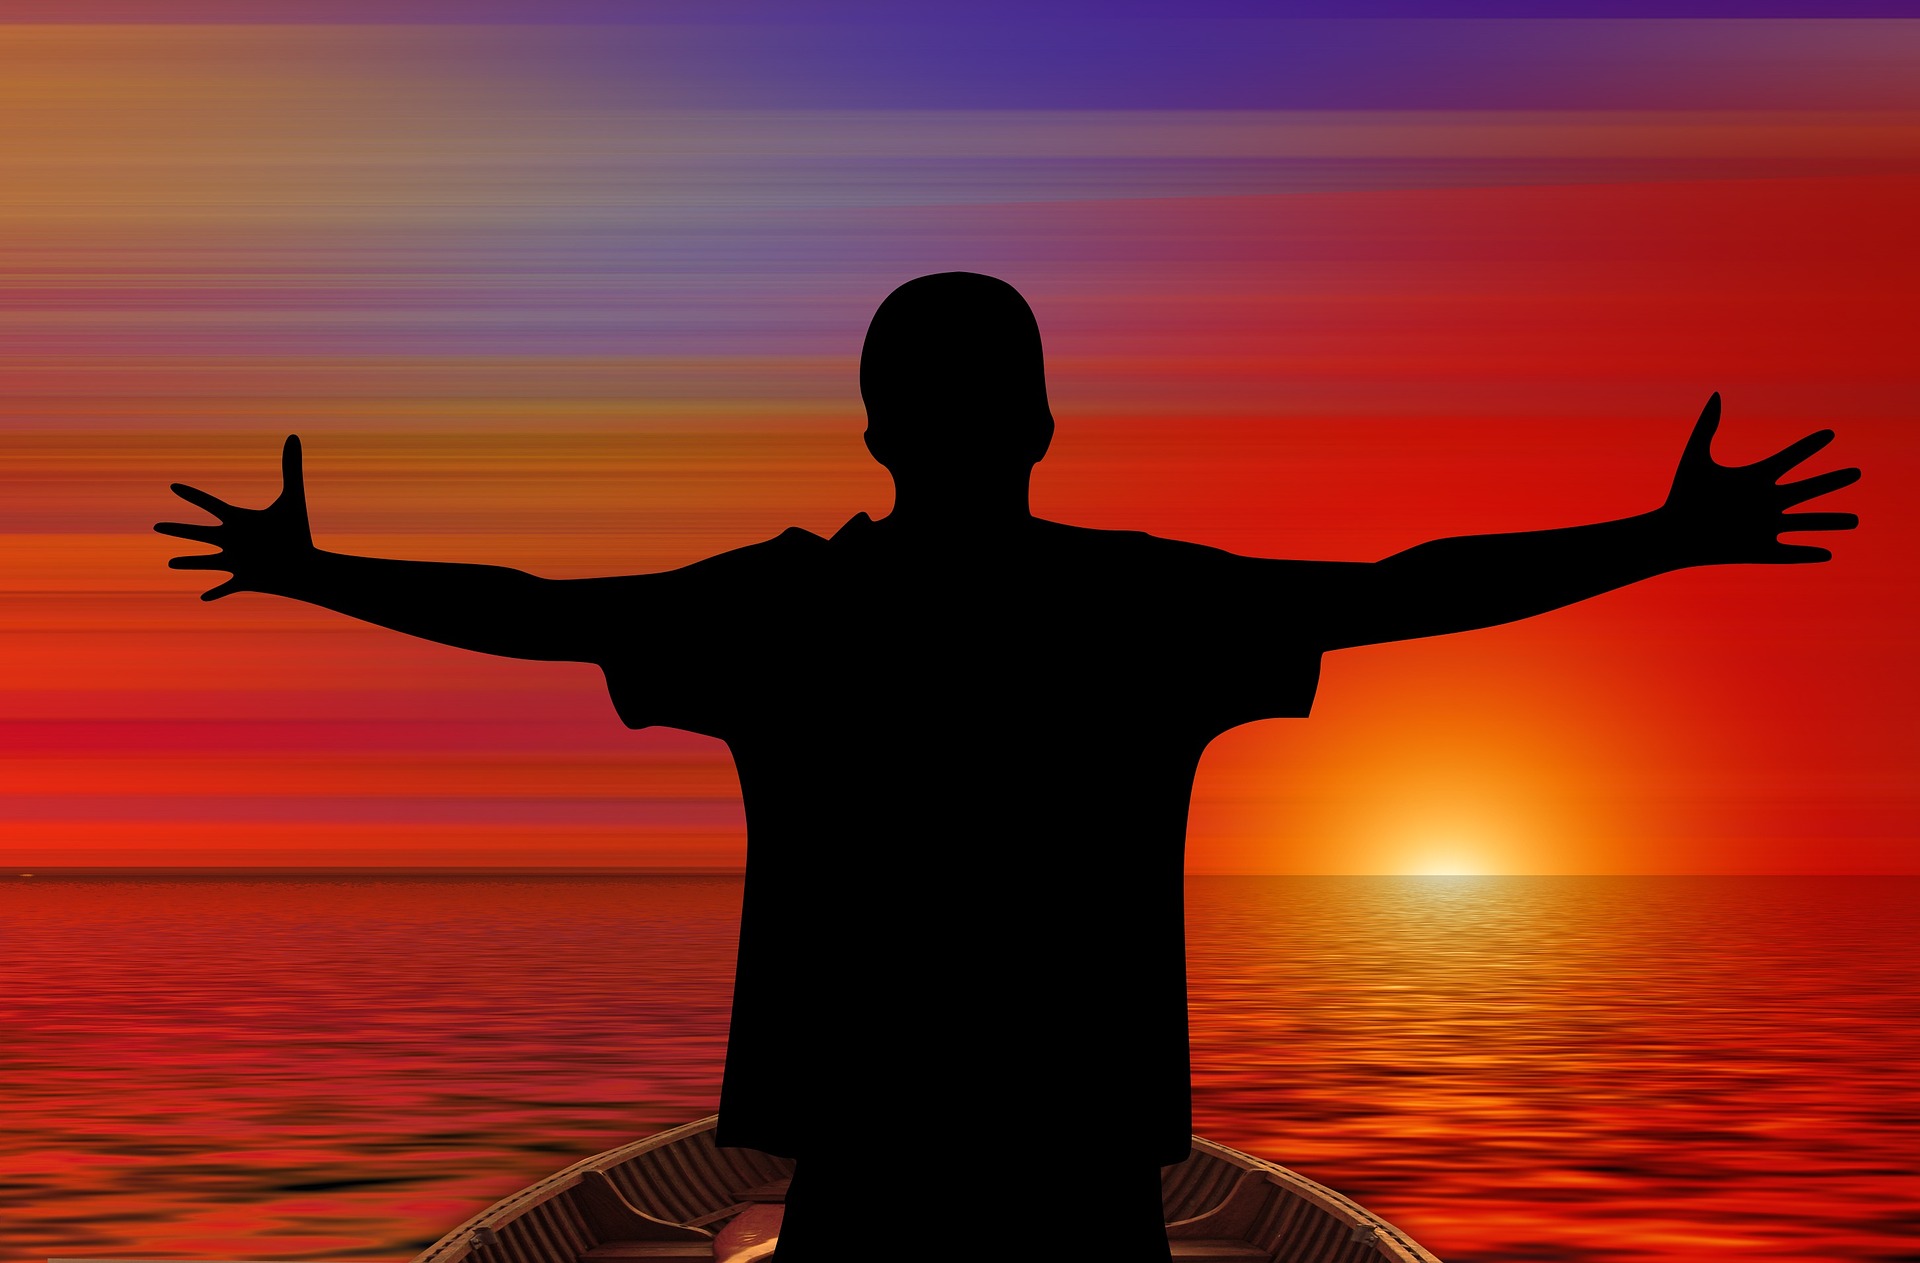 Man on boat welcoming sunrise with open arms